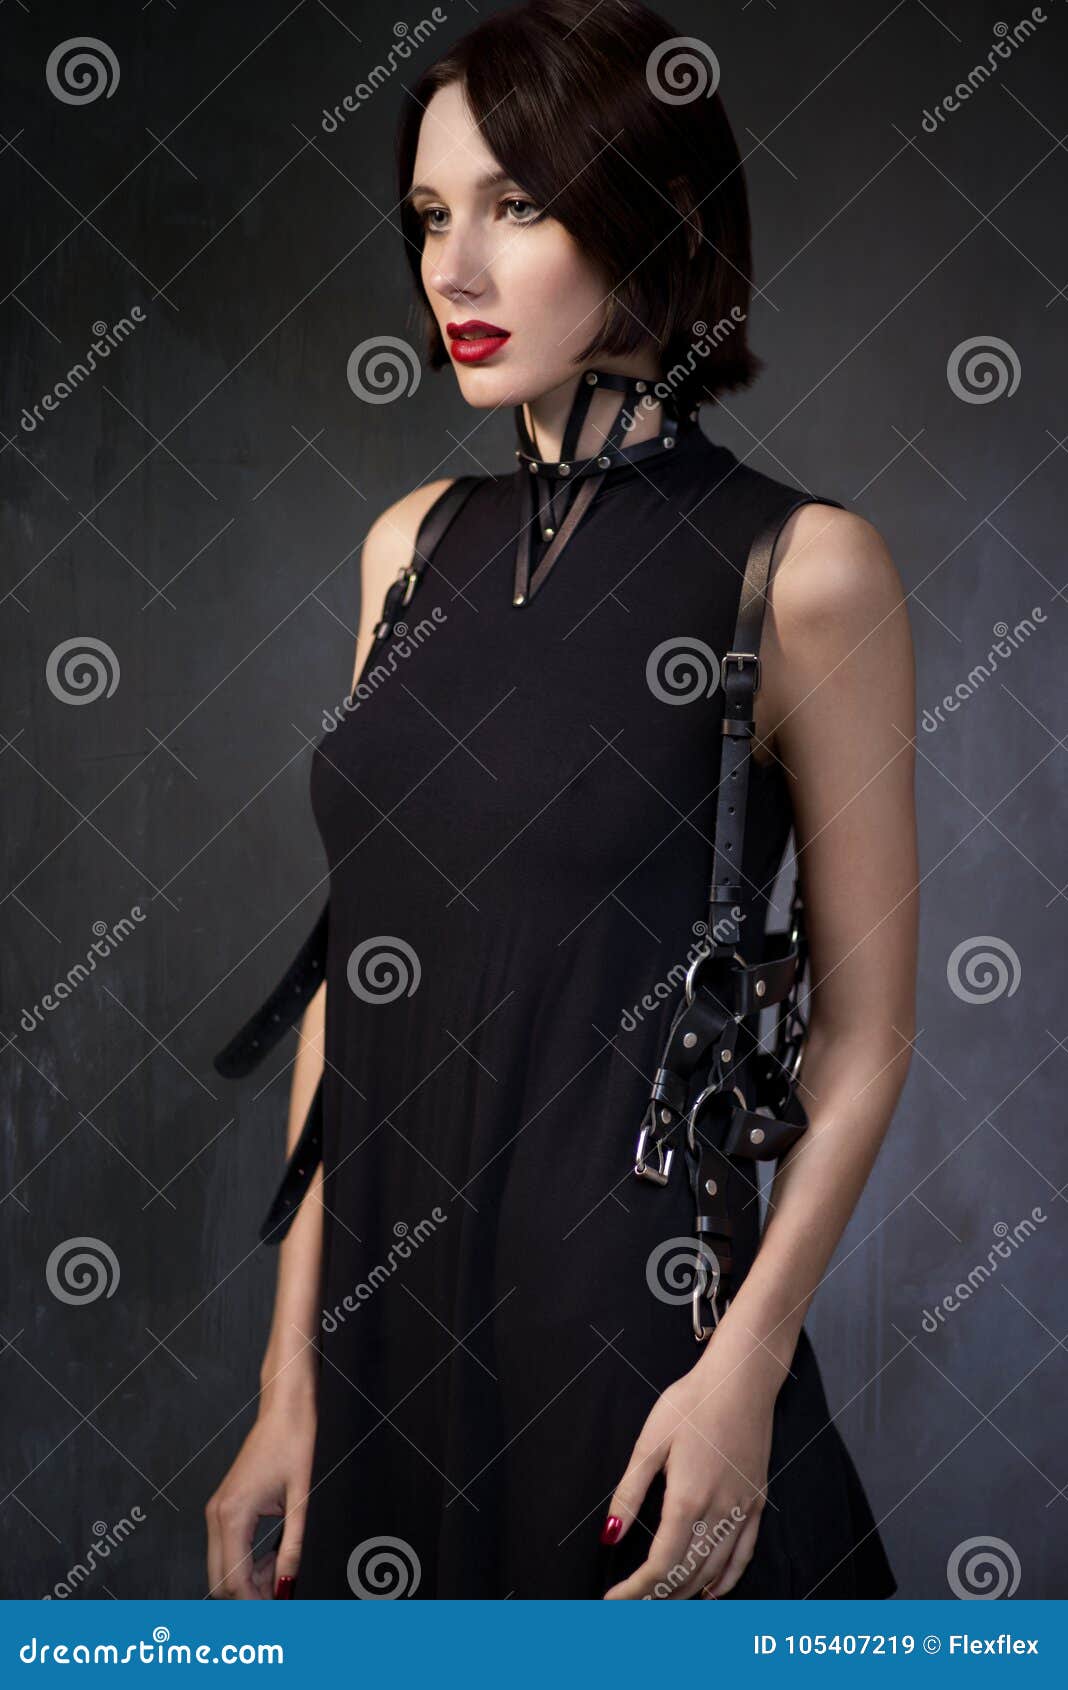 Woman In Black Dress With Leather Accessories Stock Image Image Of